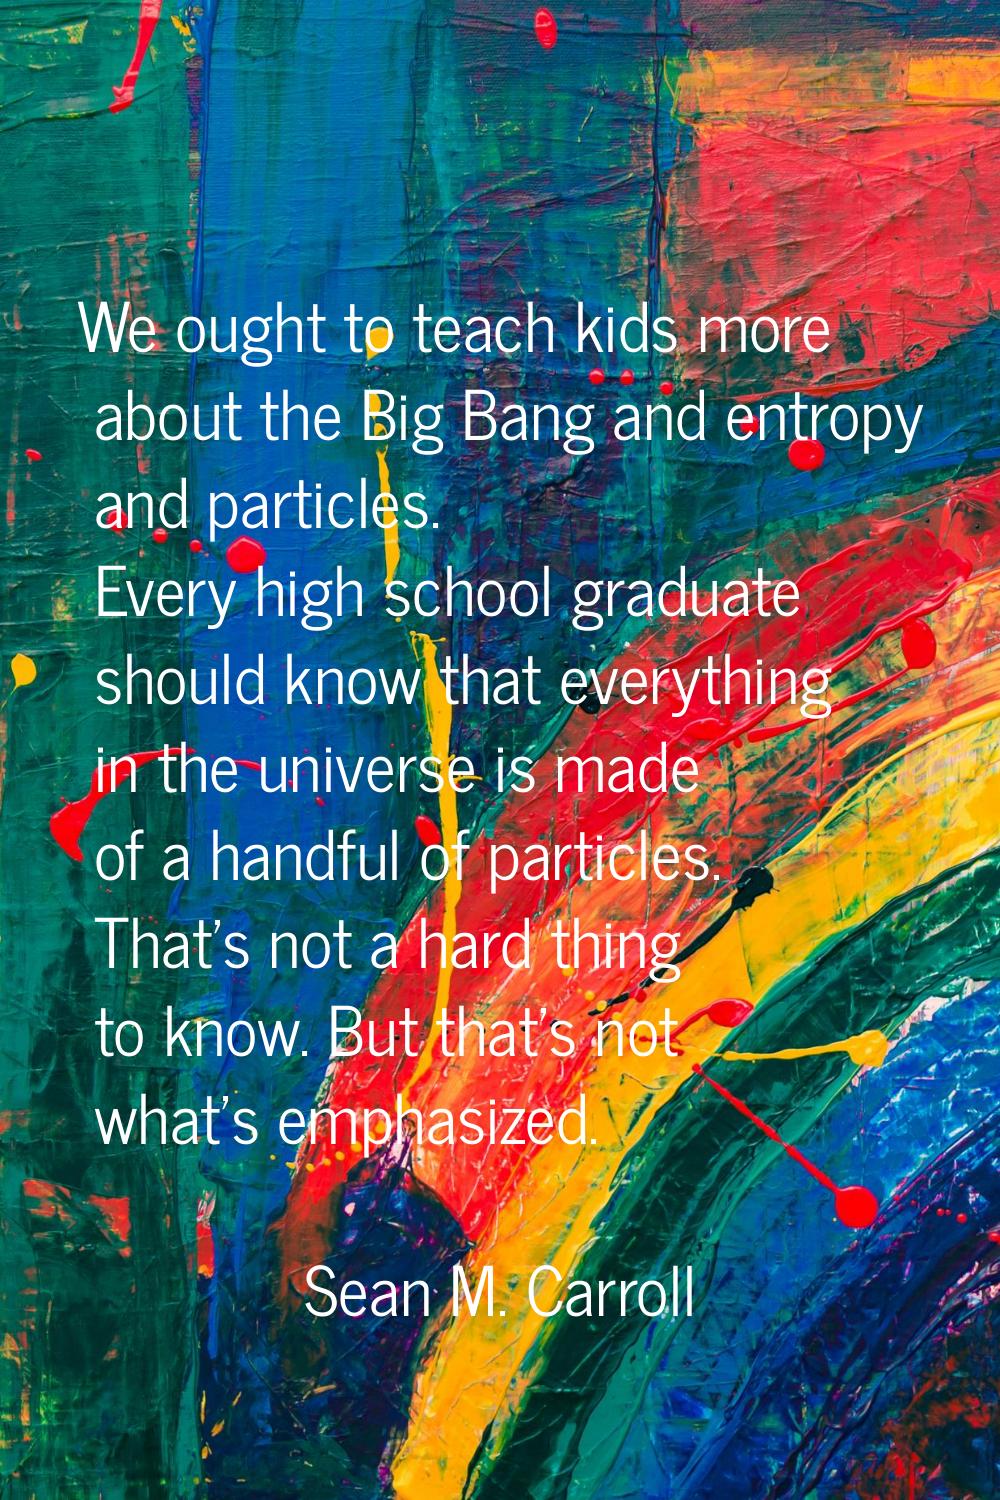 We ought to teach kids more about the Big Bang and entropy and particles. Every high school graduat